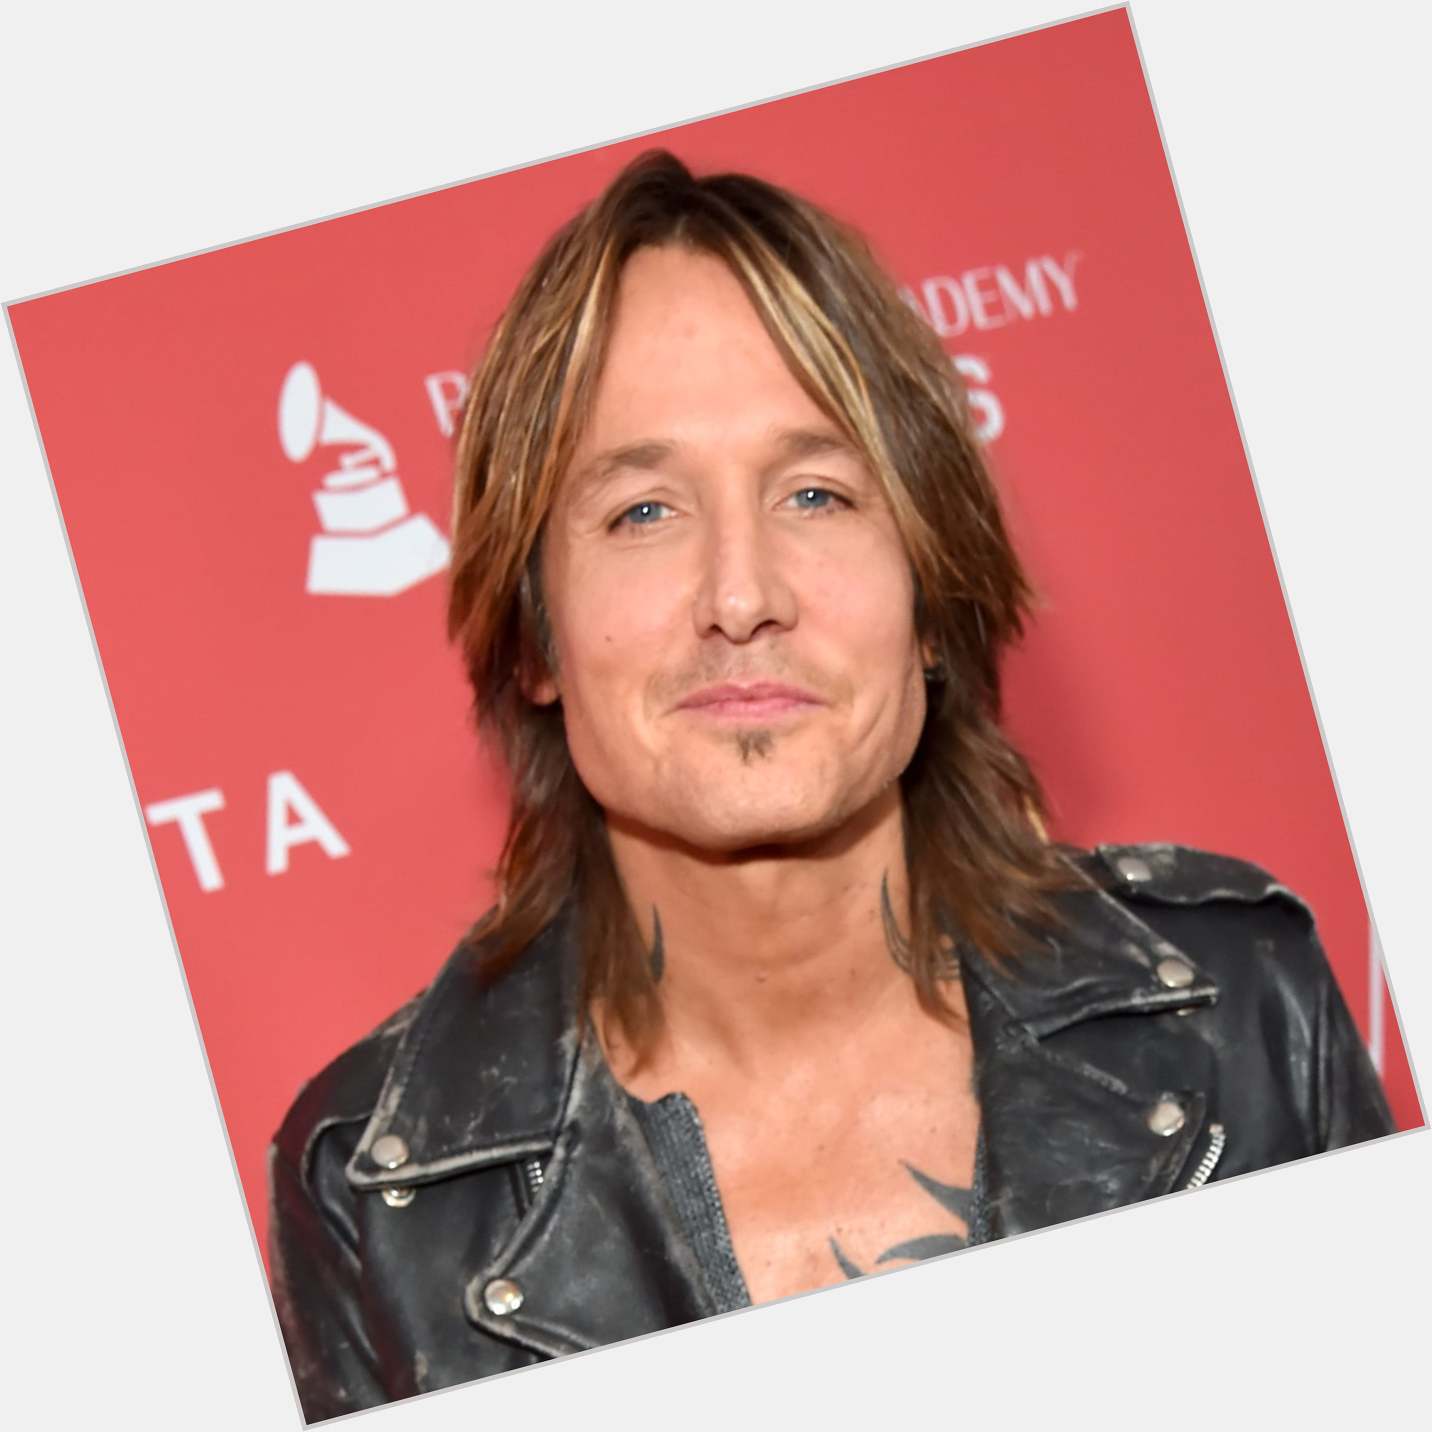 Please join us there at in wishing the one and only Keith Urban a very Happy 53rd Birthday today  